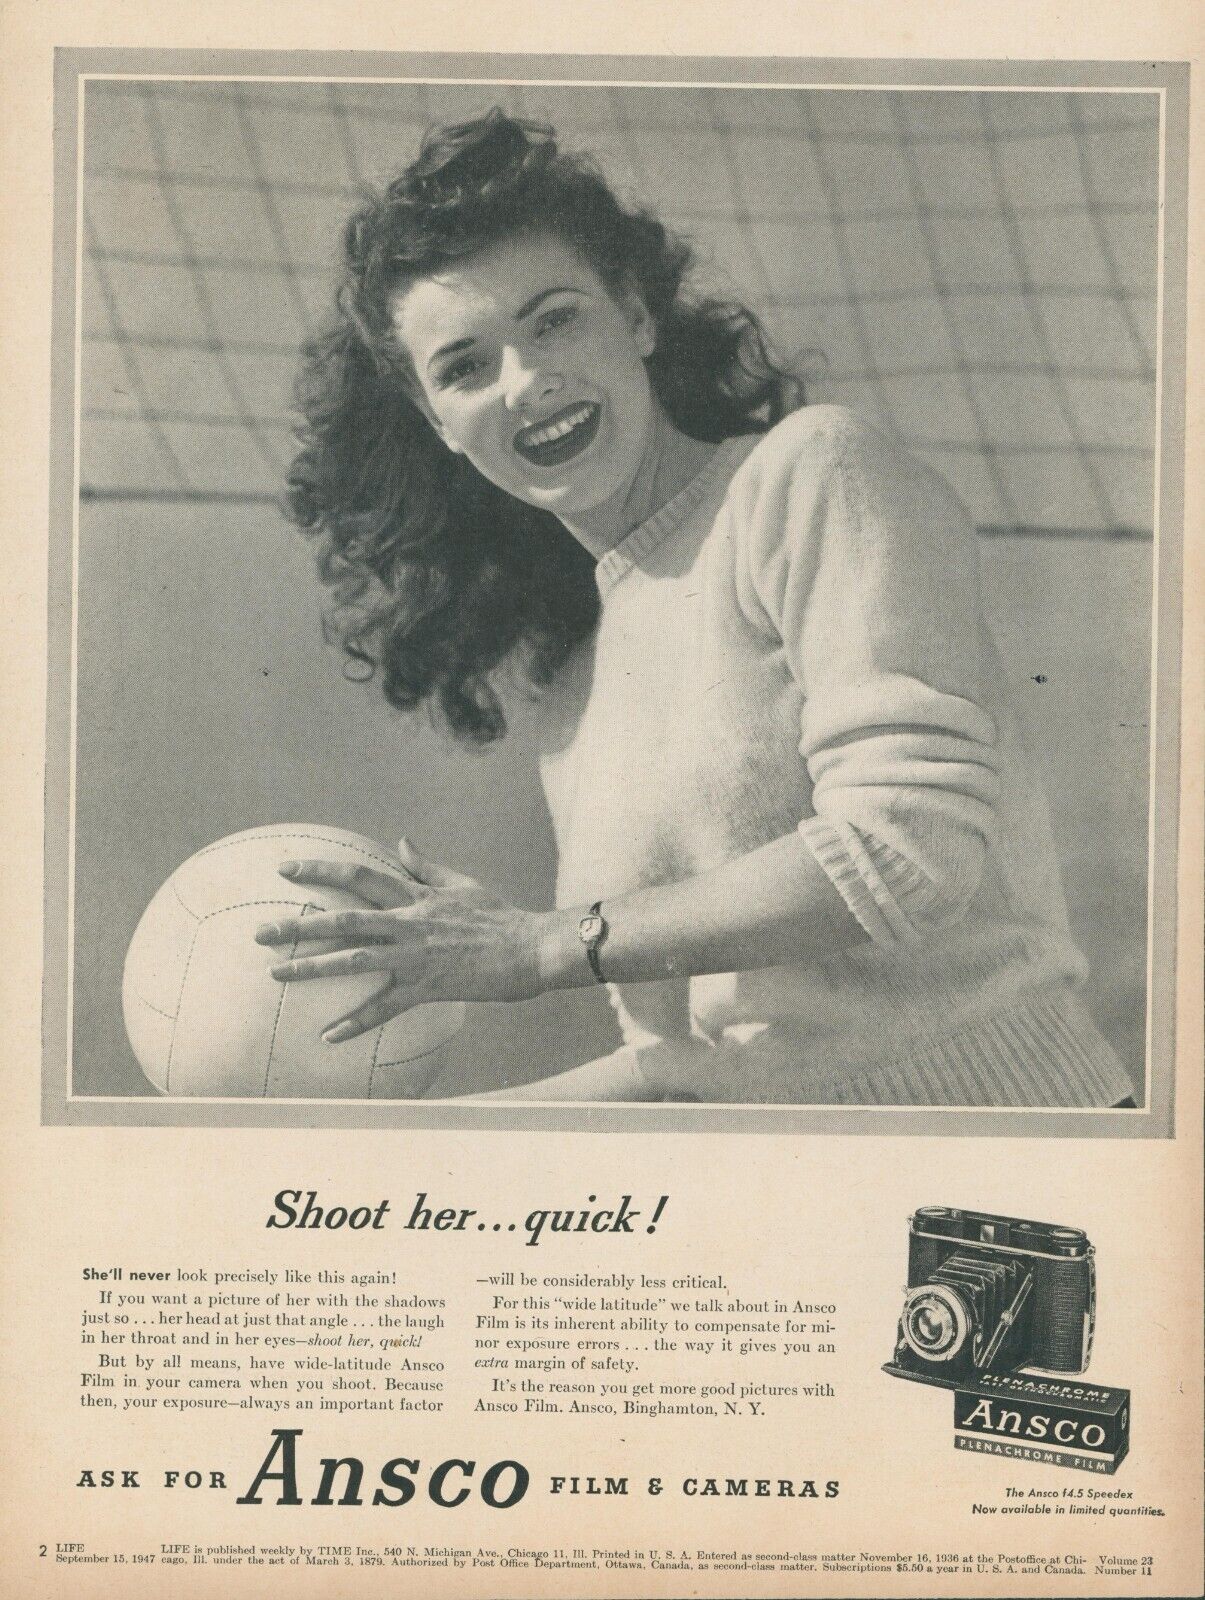 1947 Ansco Film Vollleyball Player Woman Watch Shoot Her Quick Vtg Print Ad L31